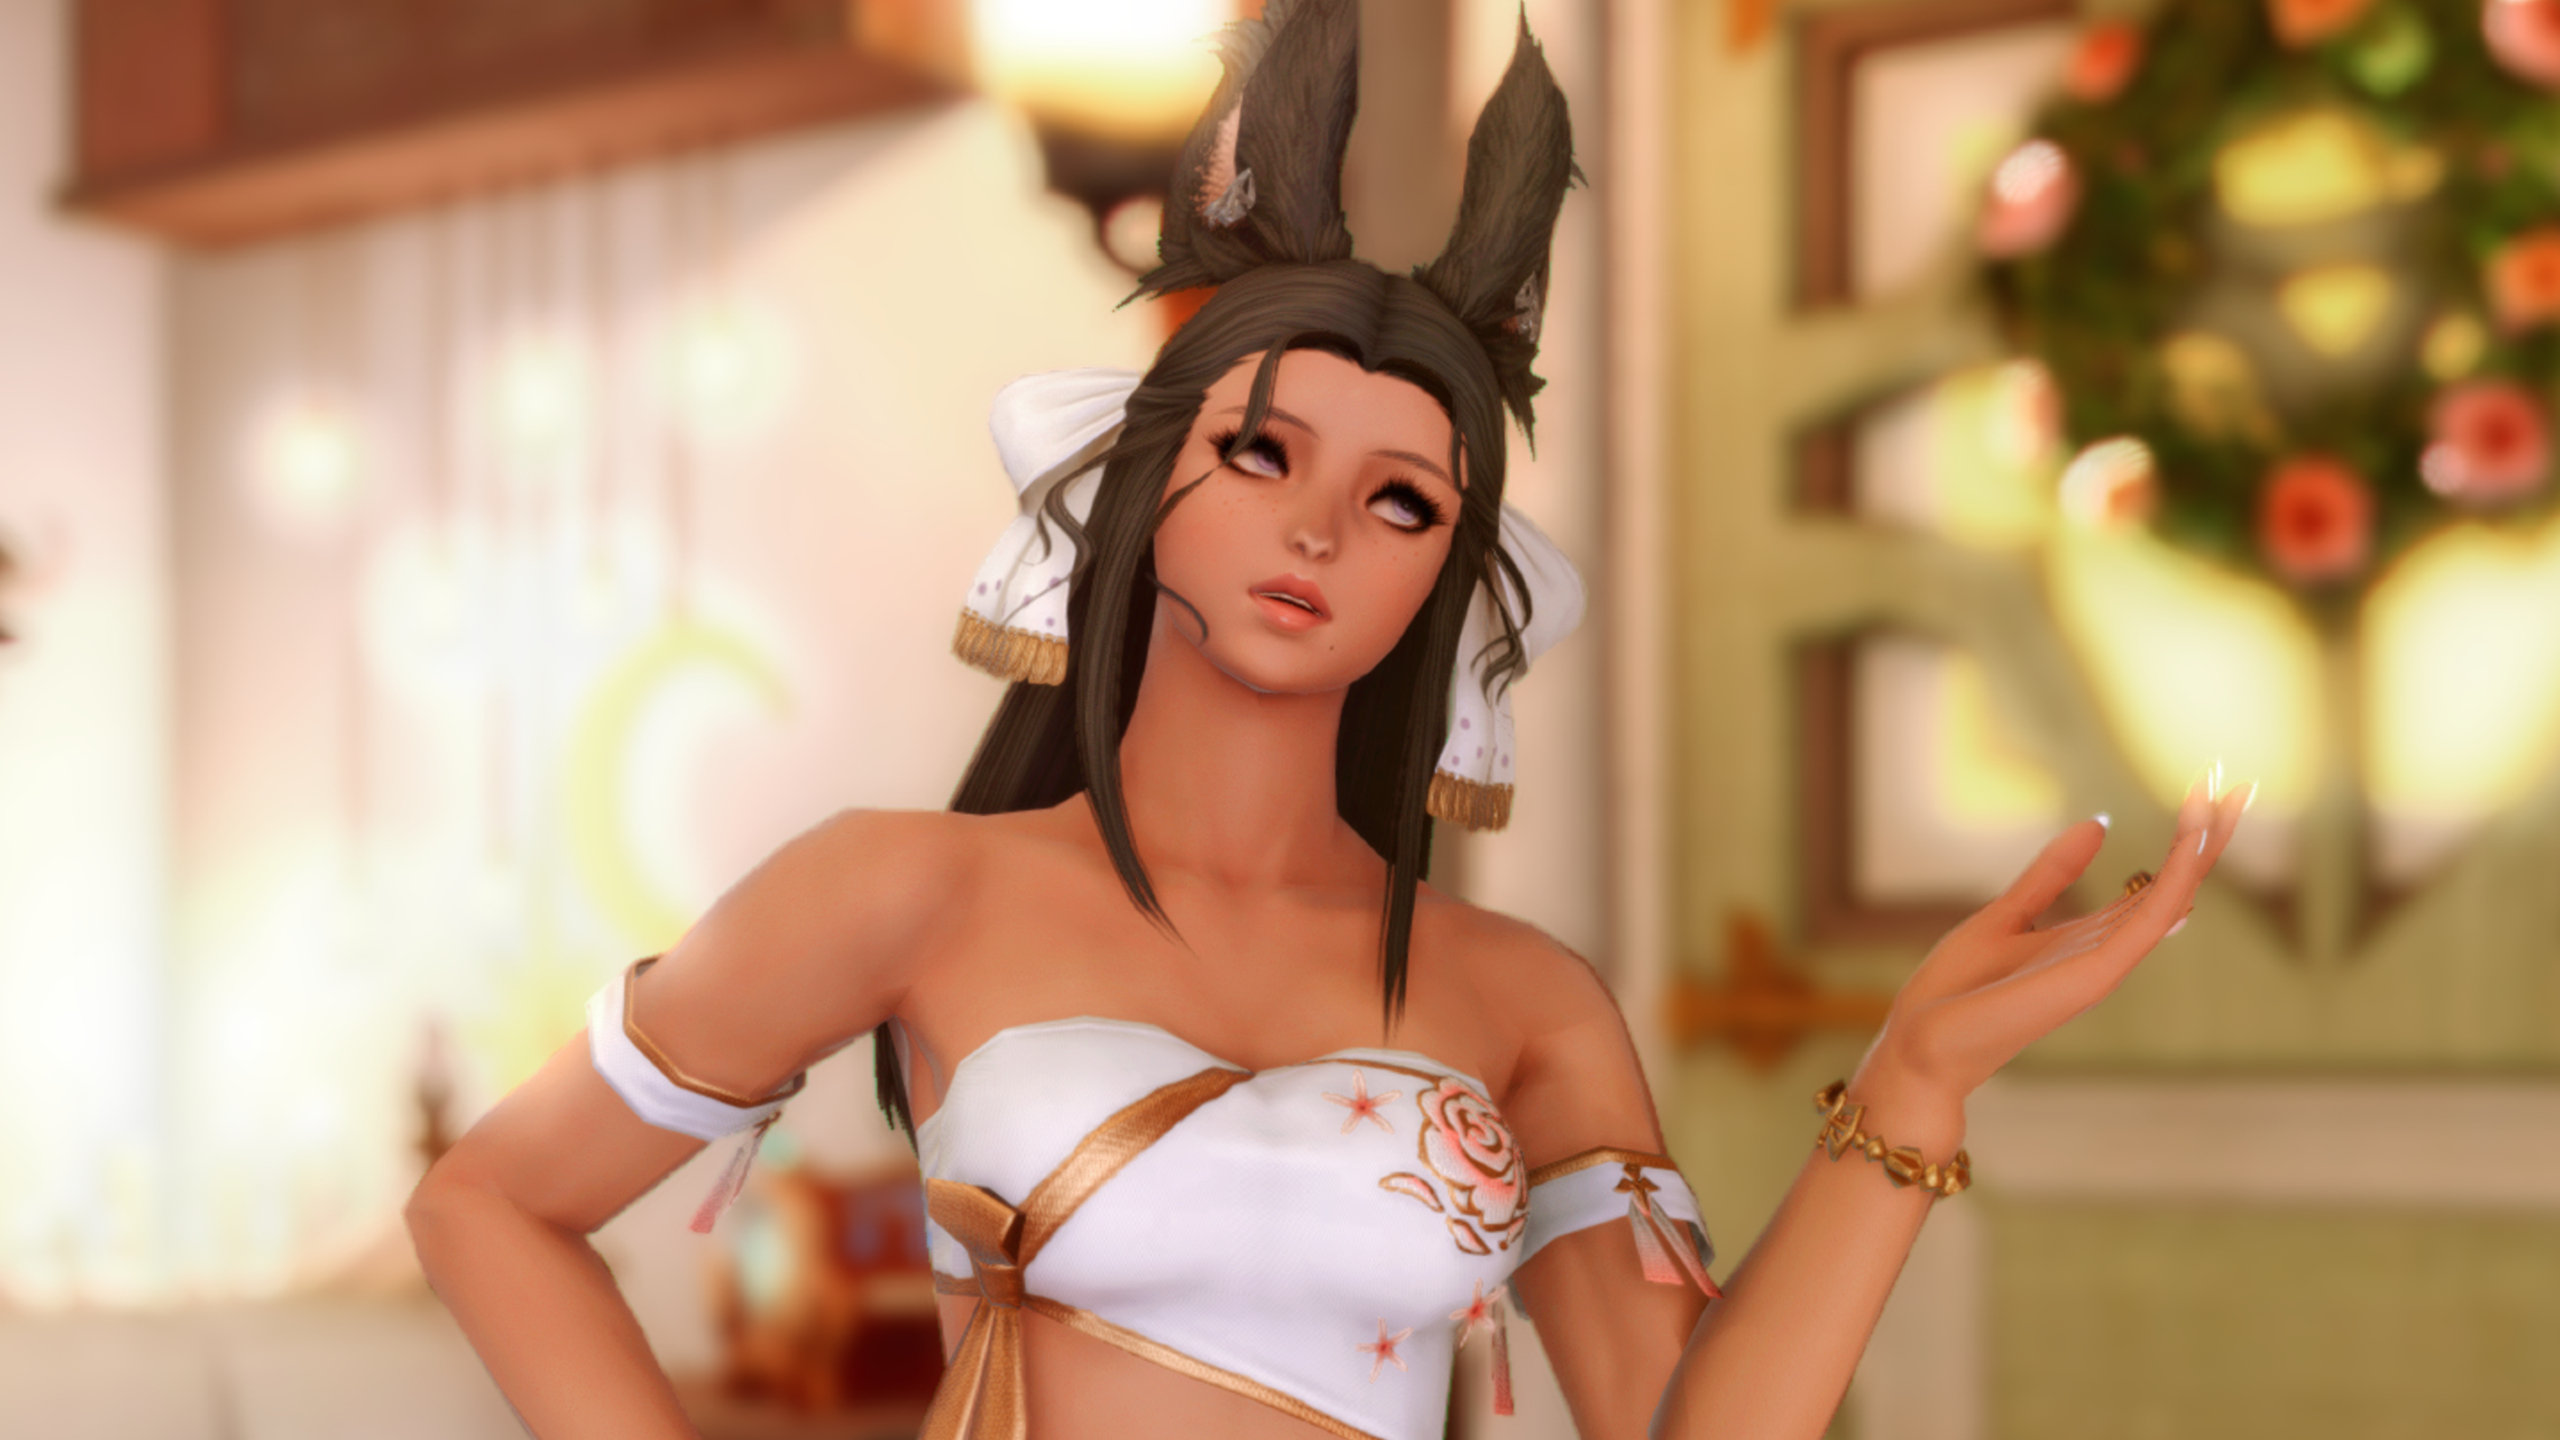  Final Fantasy 14 suffers from global round of DDoS attacks, Square Enix 'investigating the attack and taking countermeasures' 